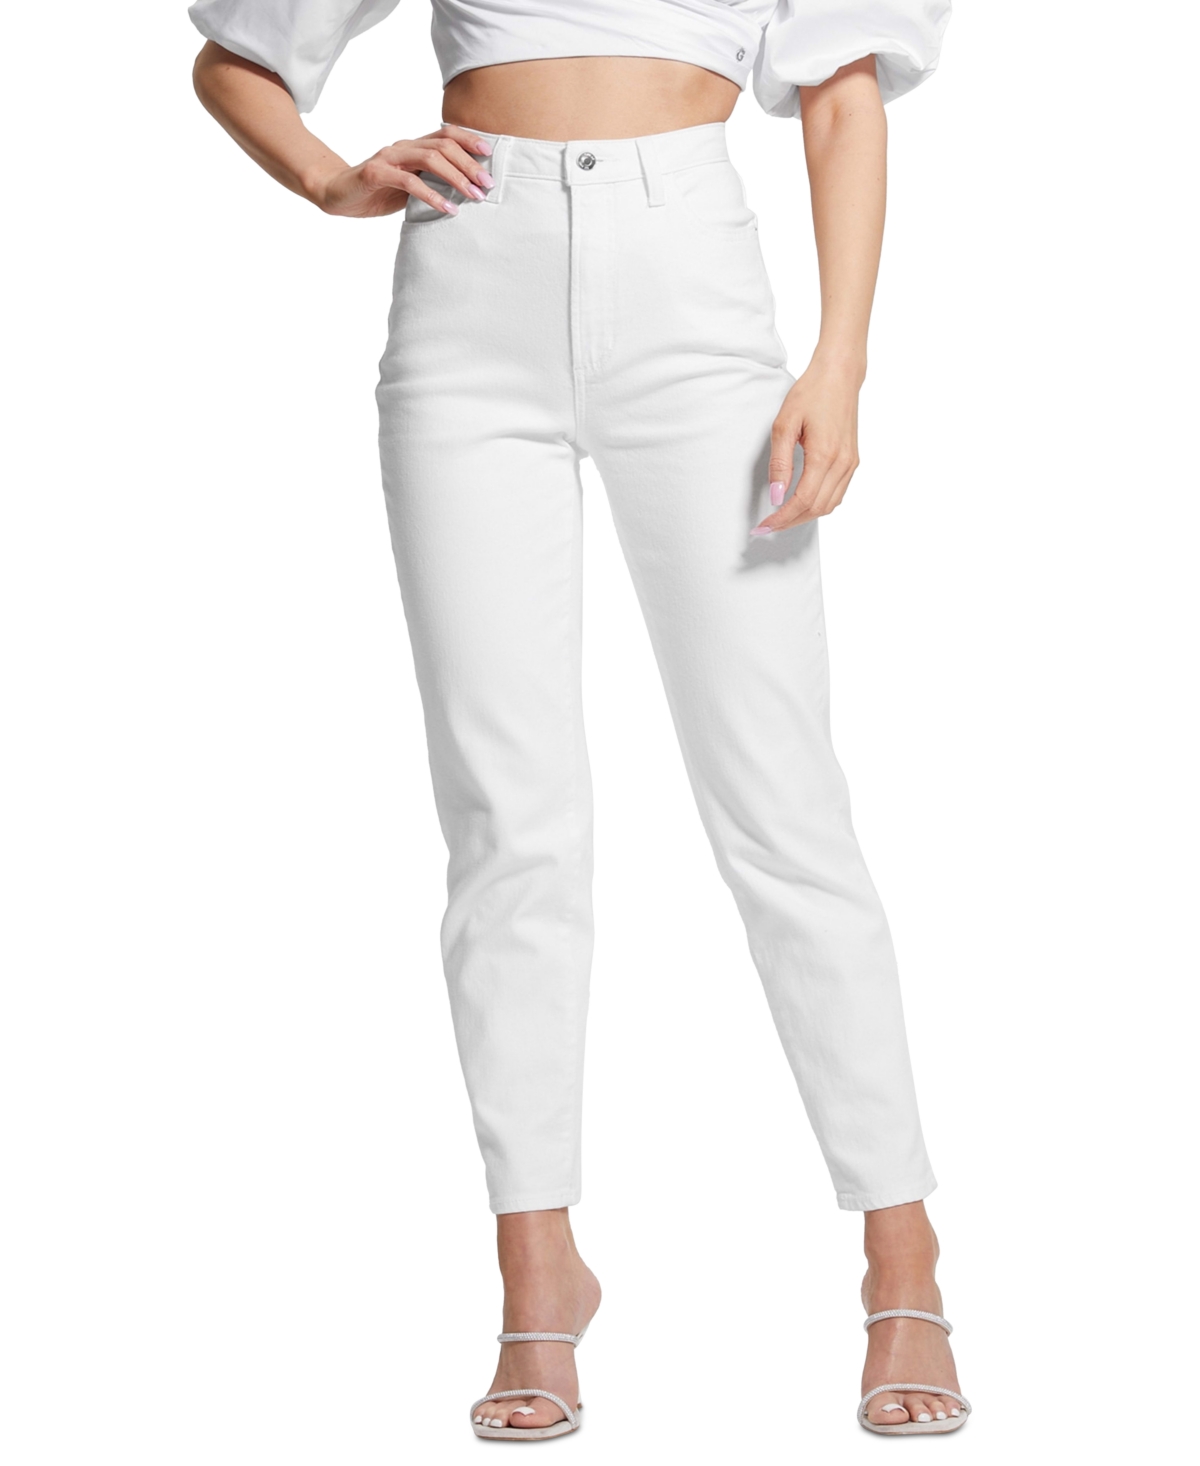  Guess Women's Super High-Rise Mom Jeans